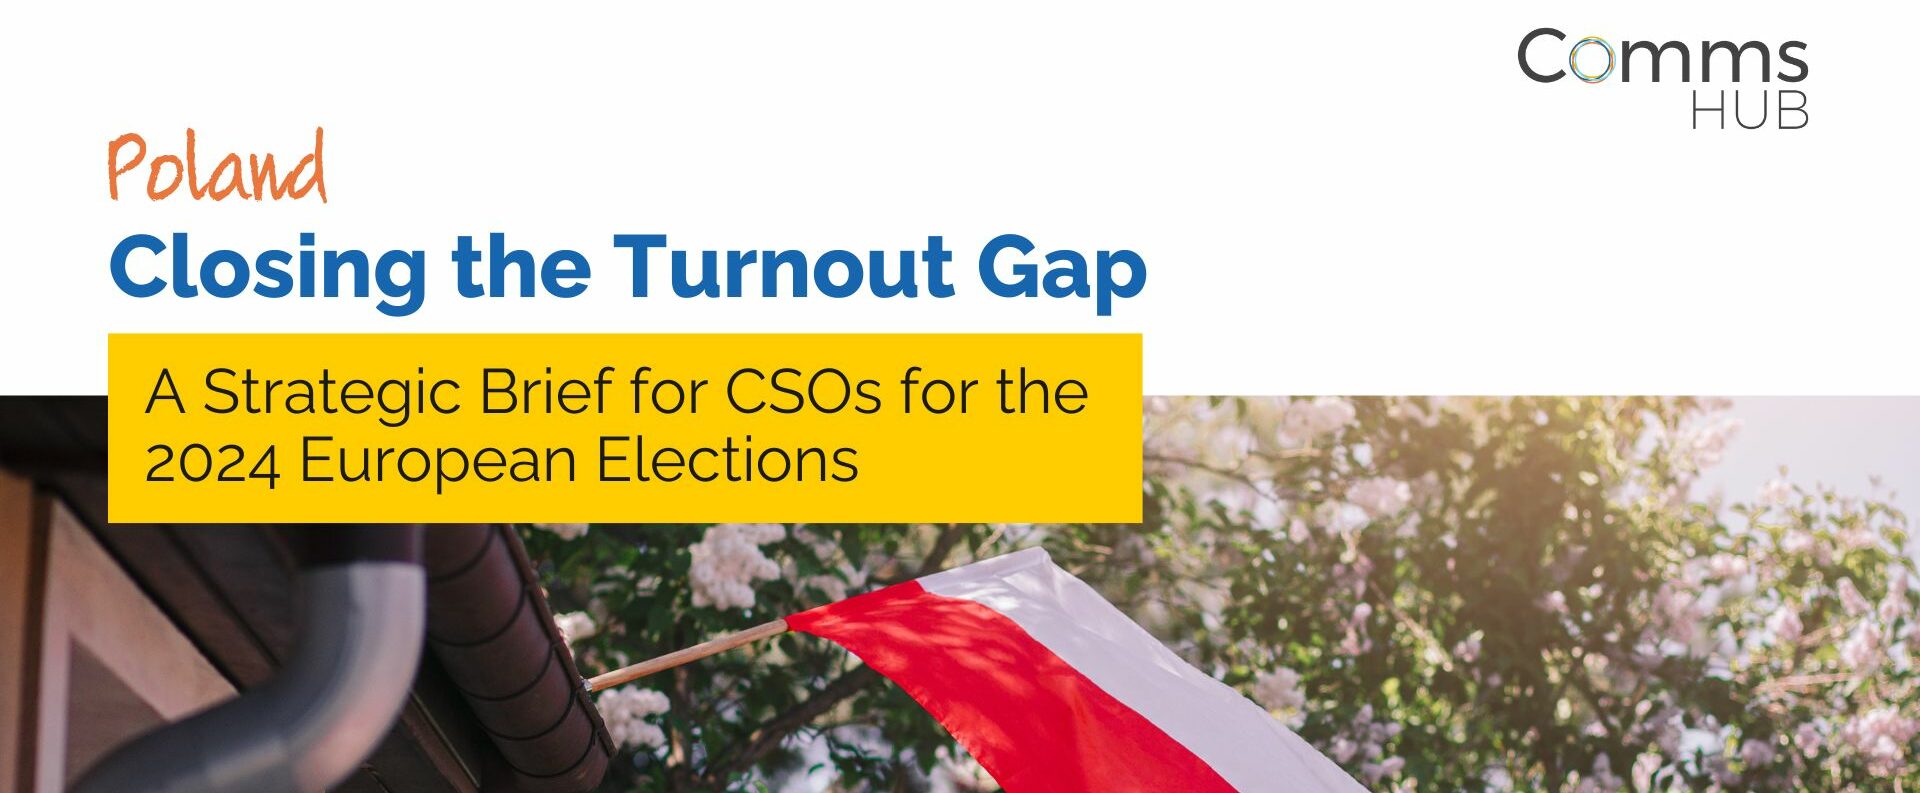 2024 EP Elections: A Strategic Brief for CSOs in Poland